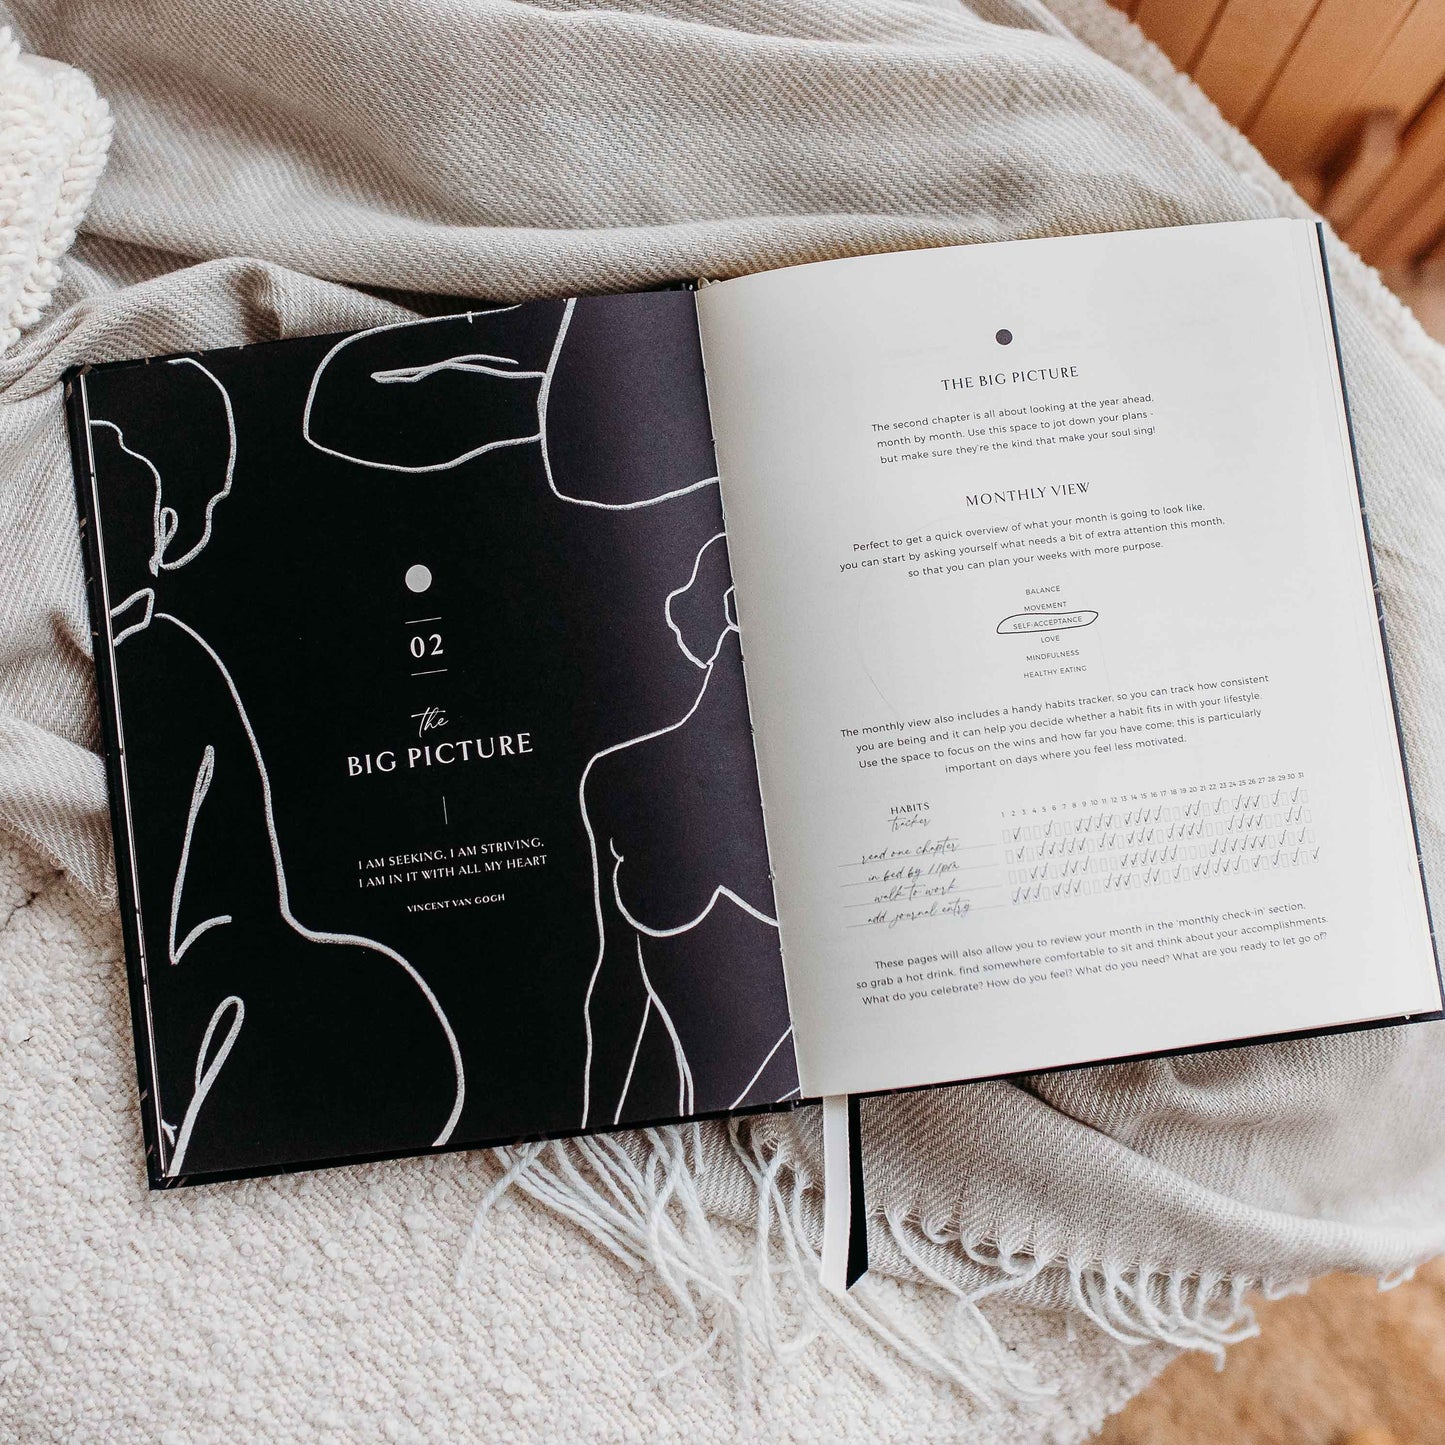 Body + Soul (Cloth) Wellness Journal and Planner (Cloth)